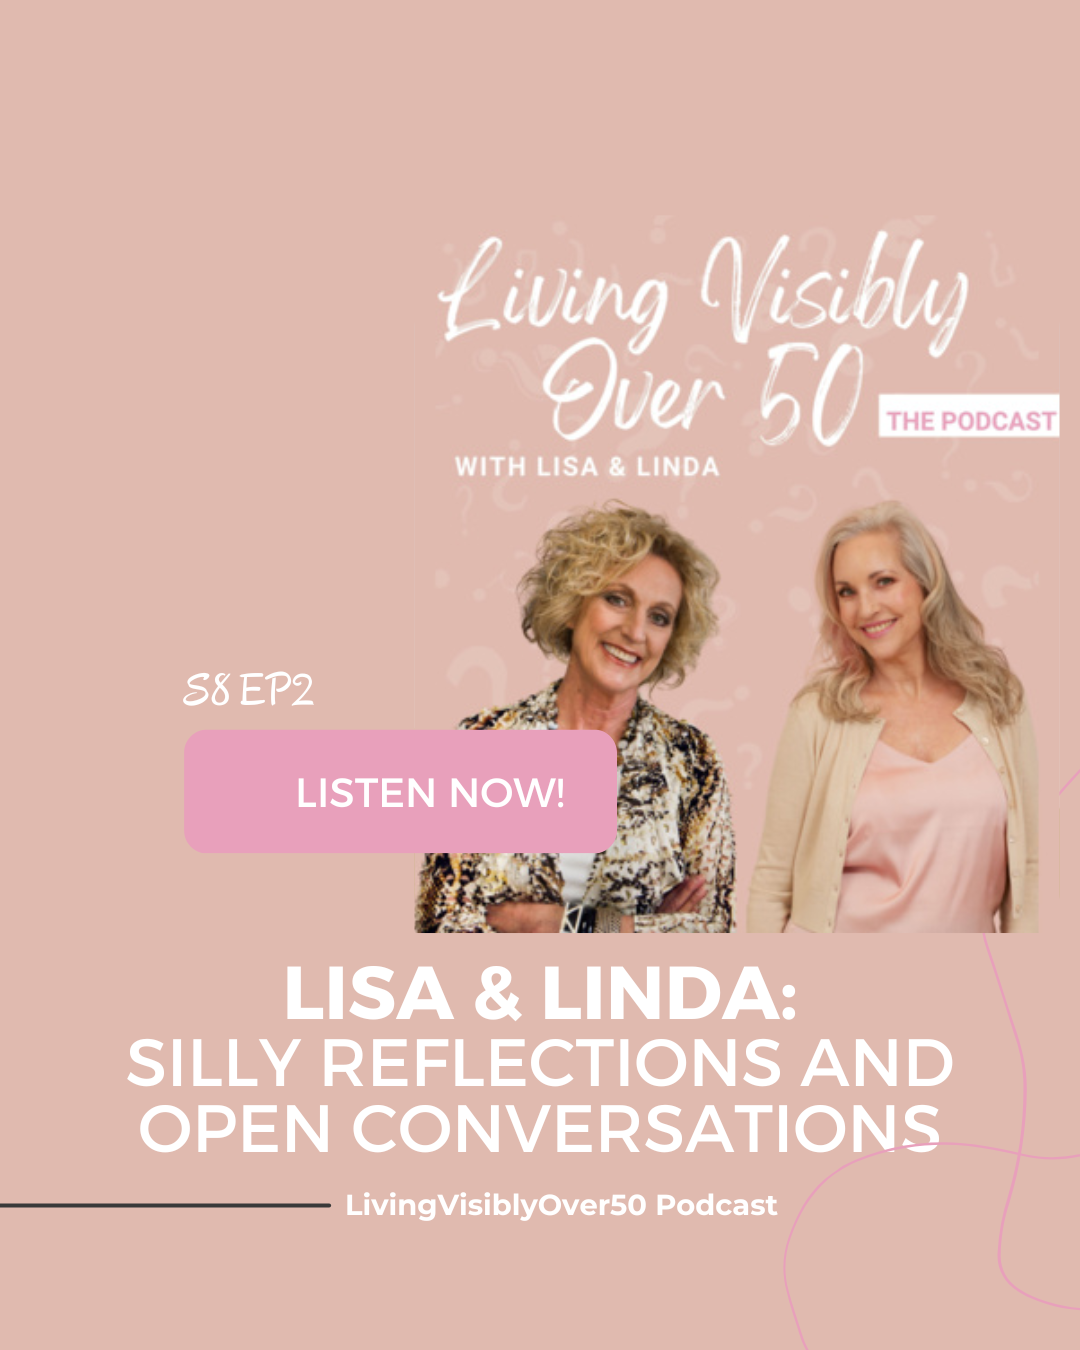 Living Visibly Over 50 podcast.  Lisa and Linda: Silly Reflections and Open Conversations